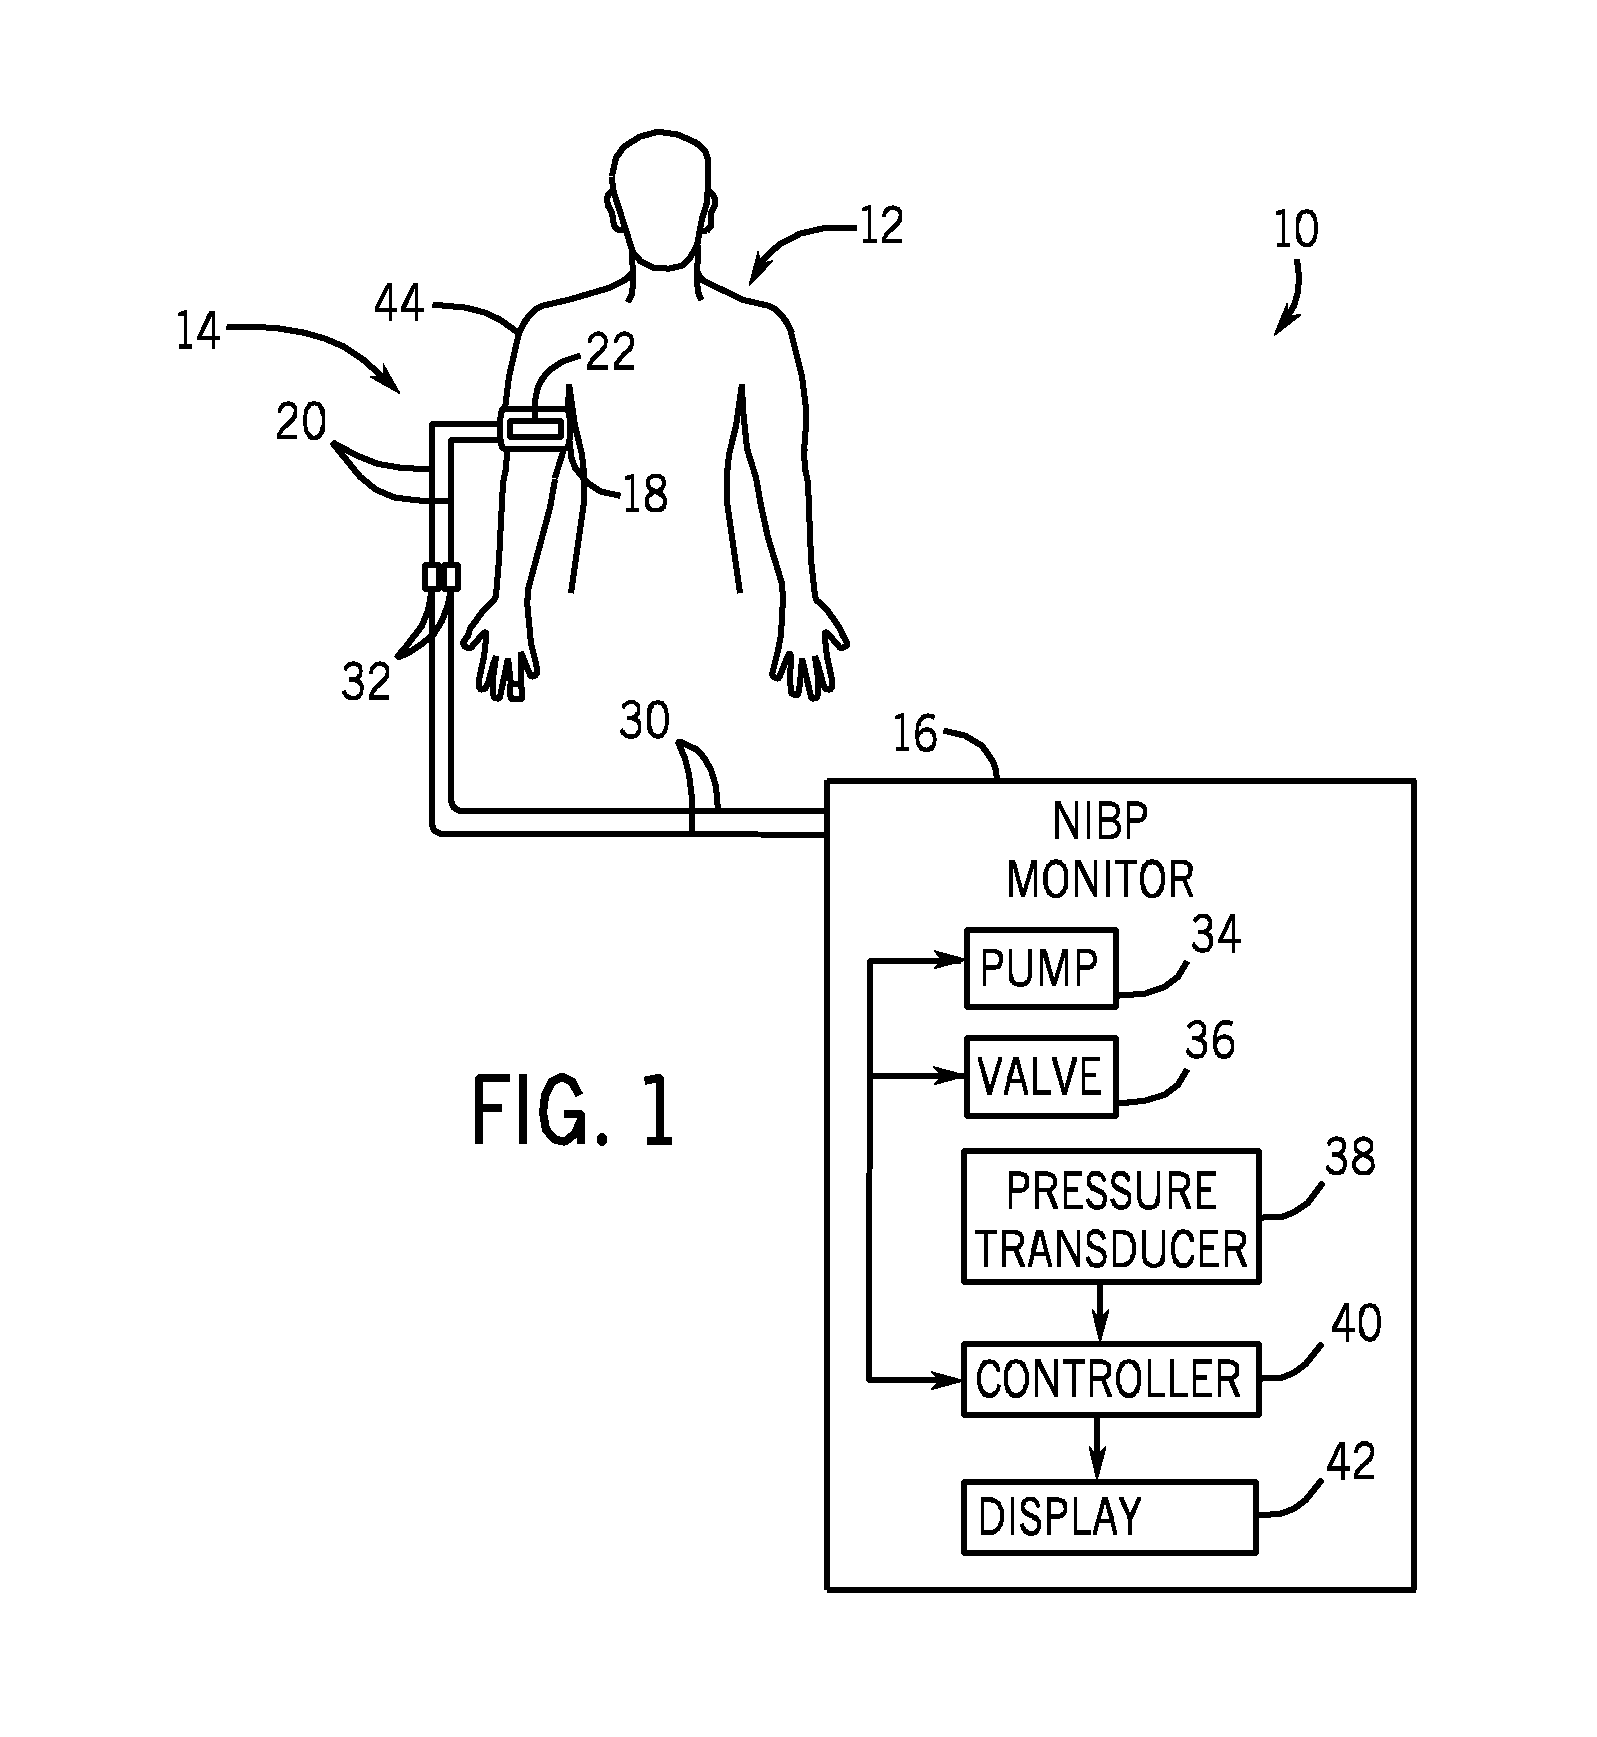 Apparatus and method for monitoring blood pressure cuff wear